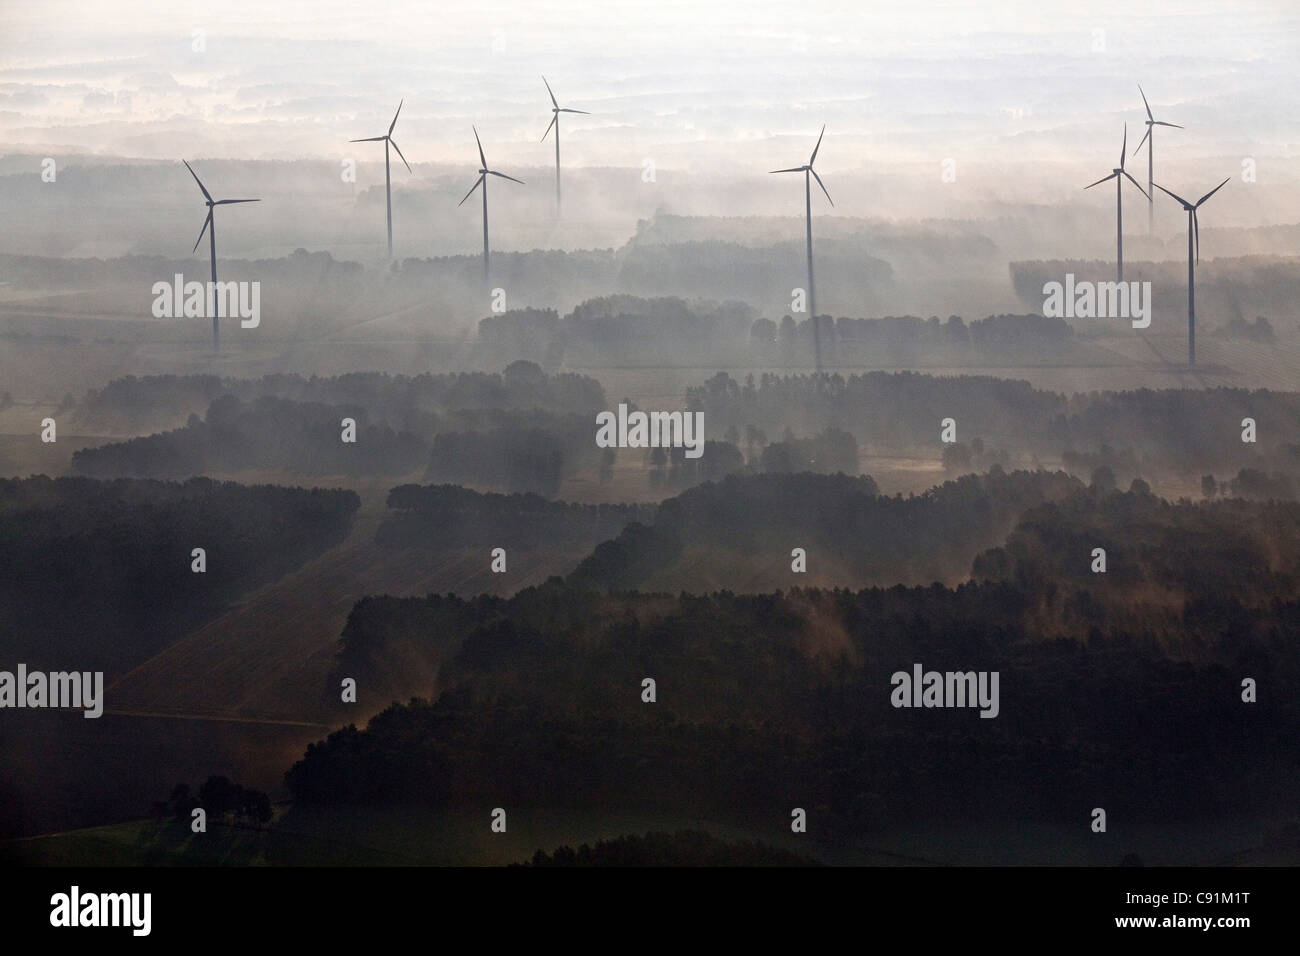 Aerial view of a wind farm in the early morning mist, Lower Saxony, Northern Germany Stock Photo